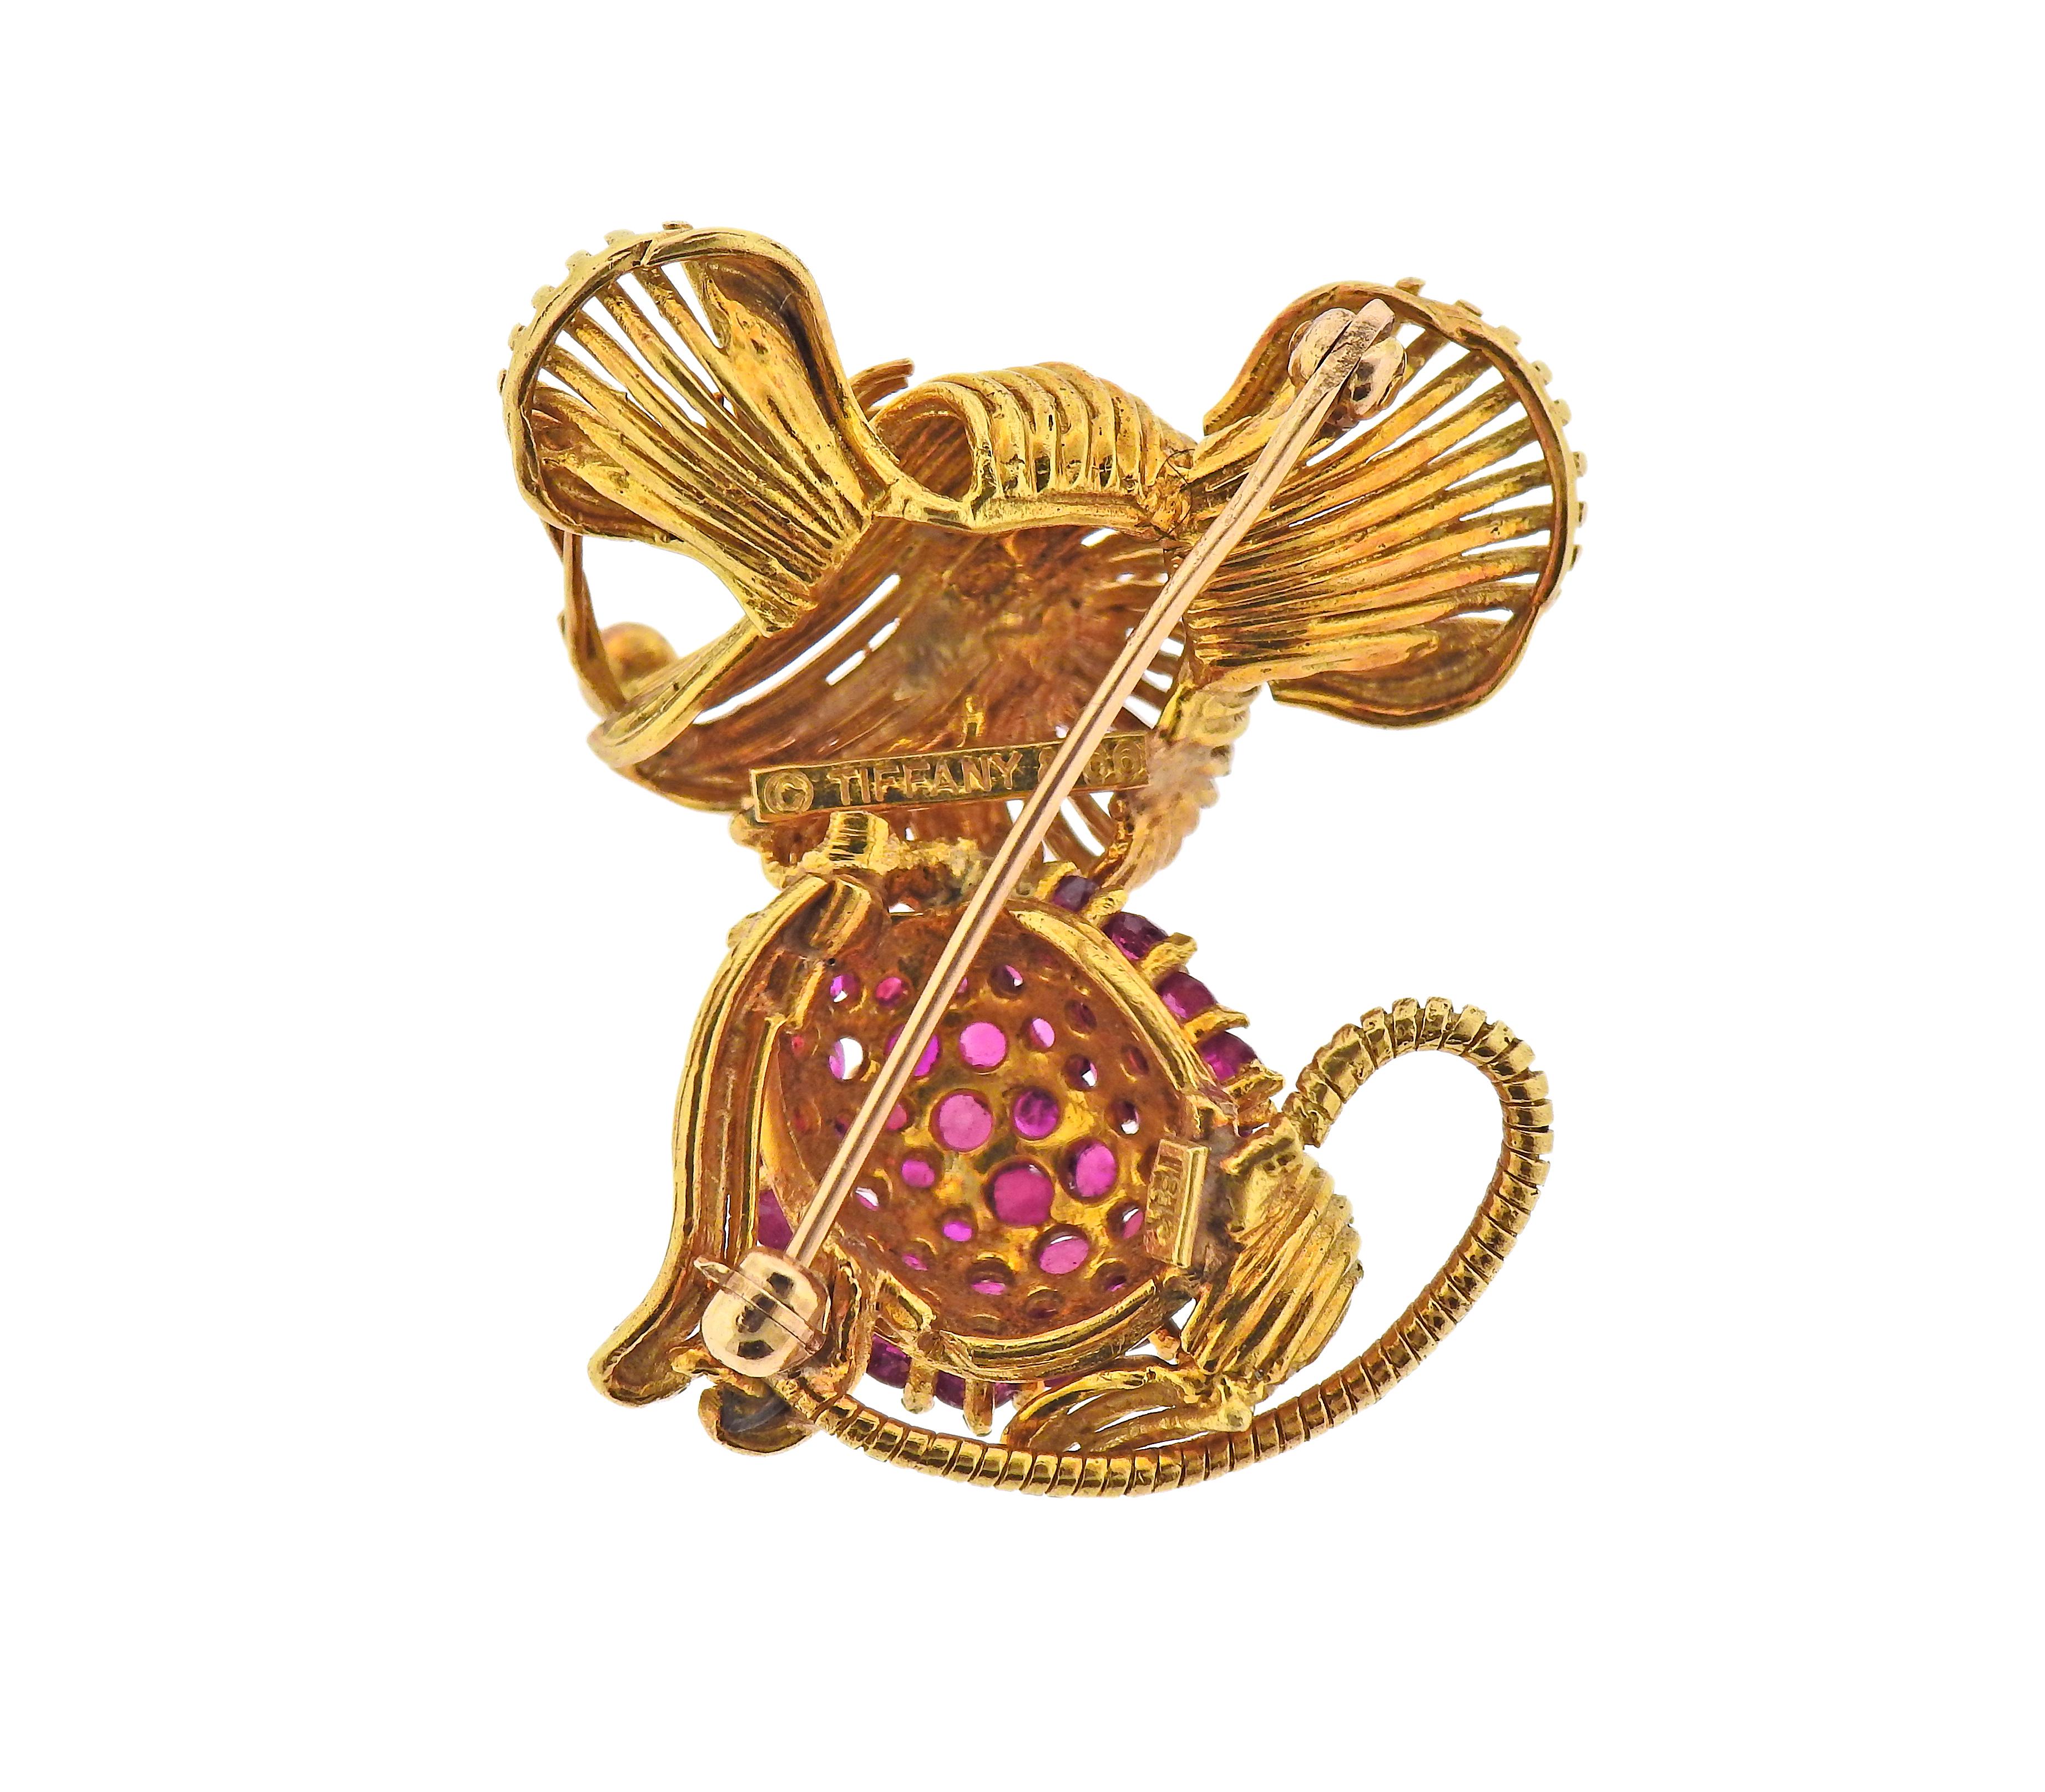 Adorable 1960s Tiffany & Co 18k gold mouse brooch, with emerald eyes and rubies on the belly. Brooch measures 35mm x 33mm. Marked: Tiffany & Co 18k. Weight - 14.9 grams.